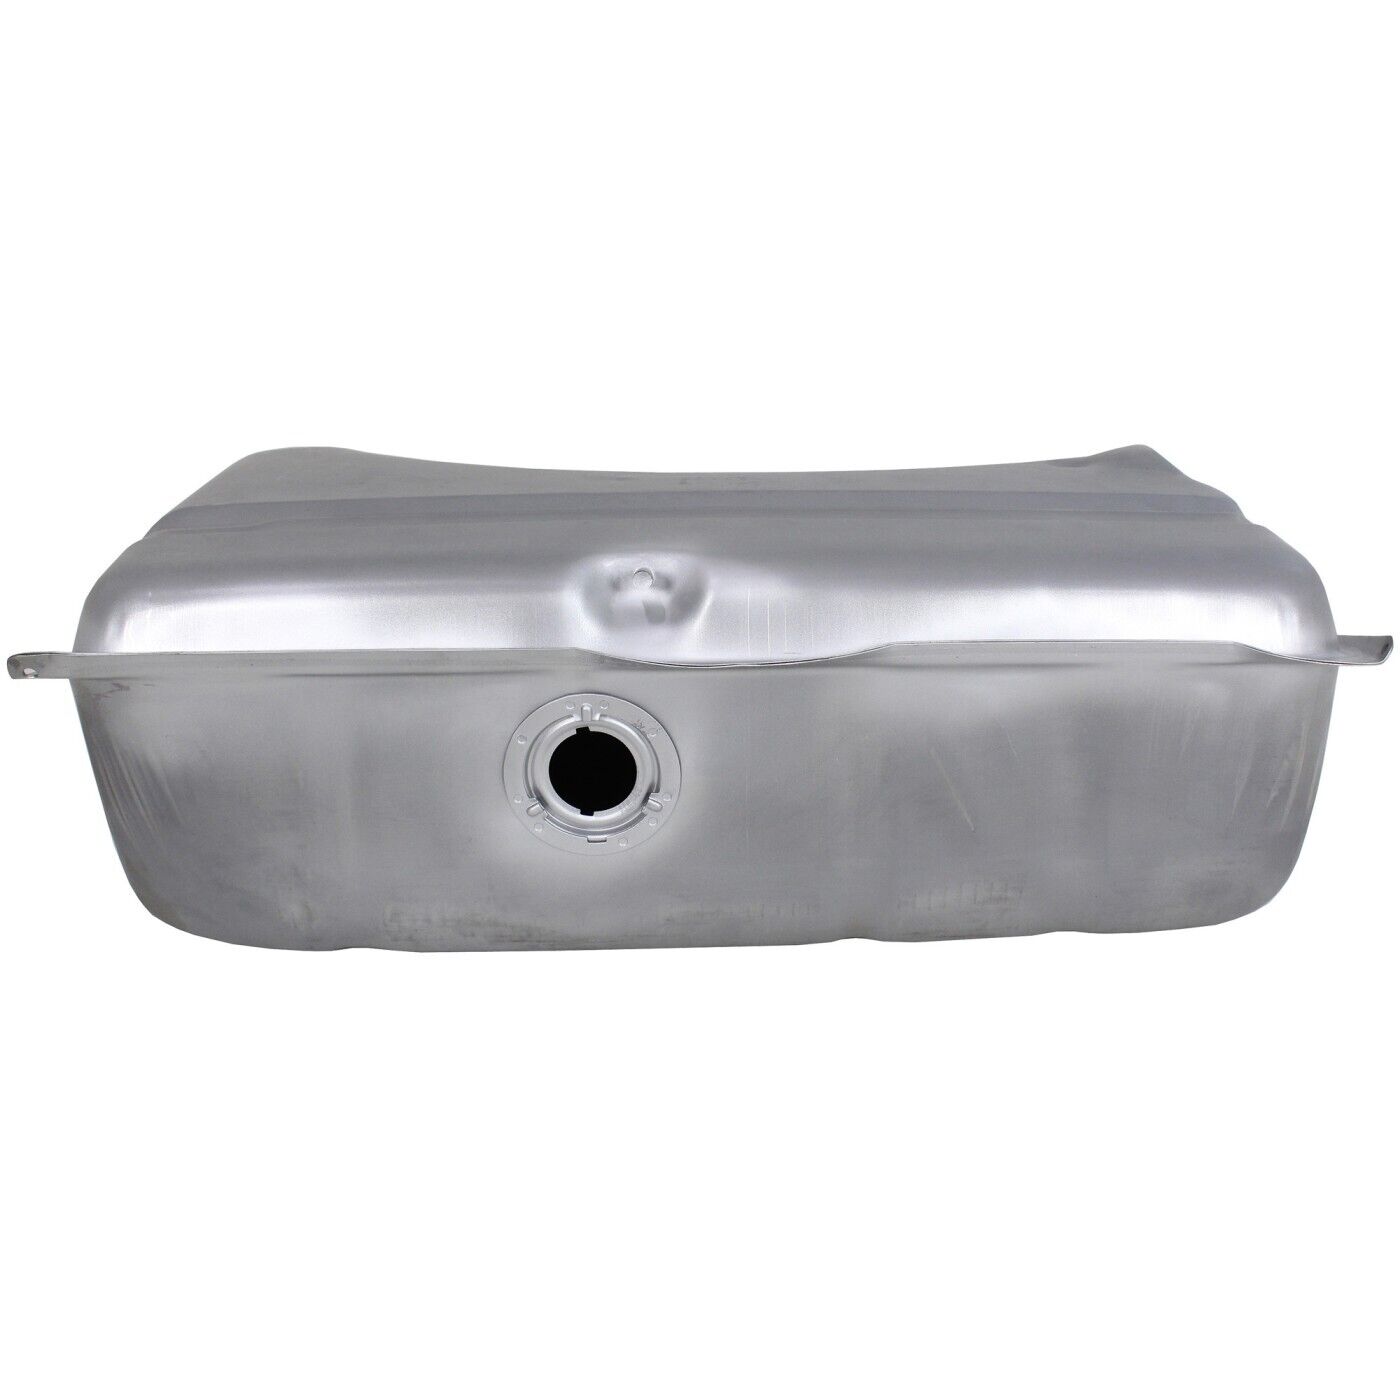 16 Gallon Fuel Gas Tank For 71-76 Dodge Dart Plymouth Duster Silver